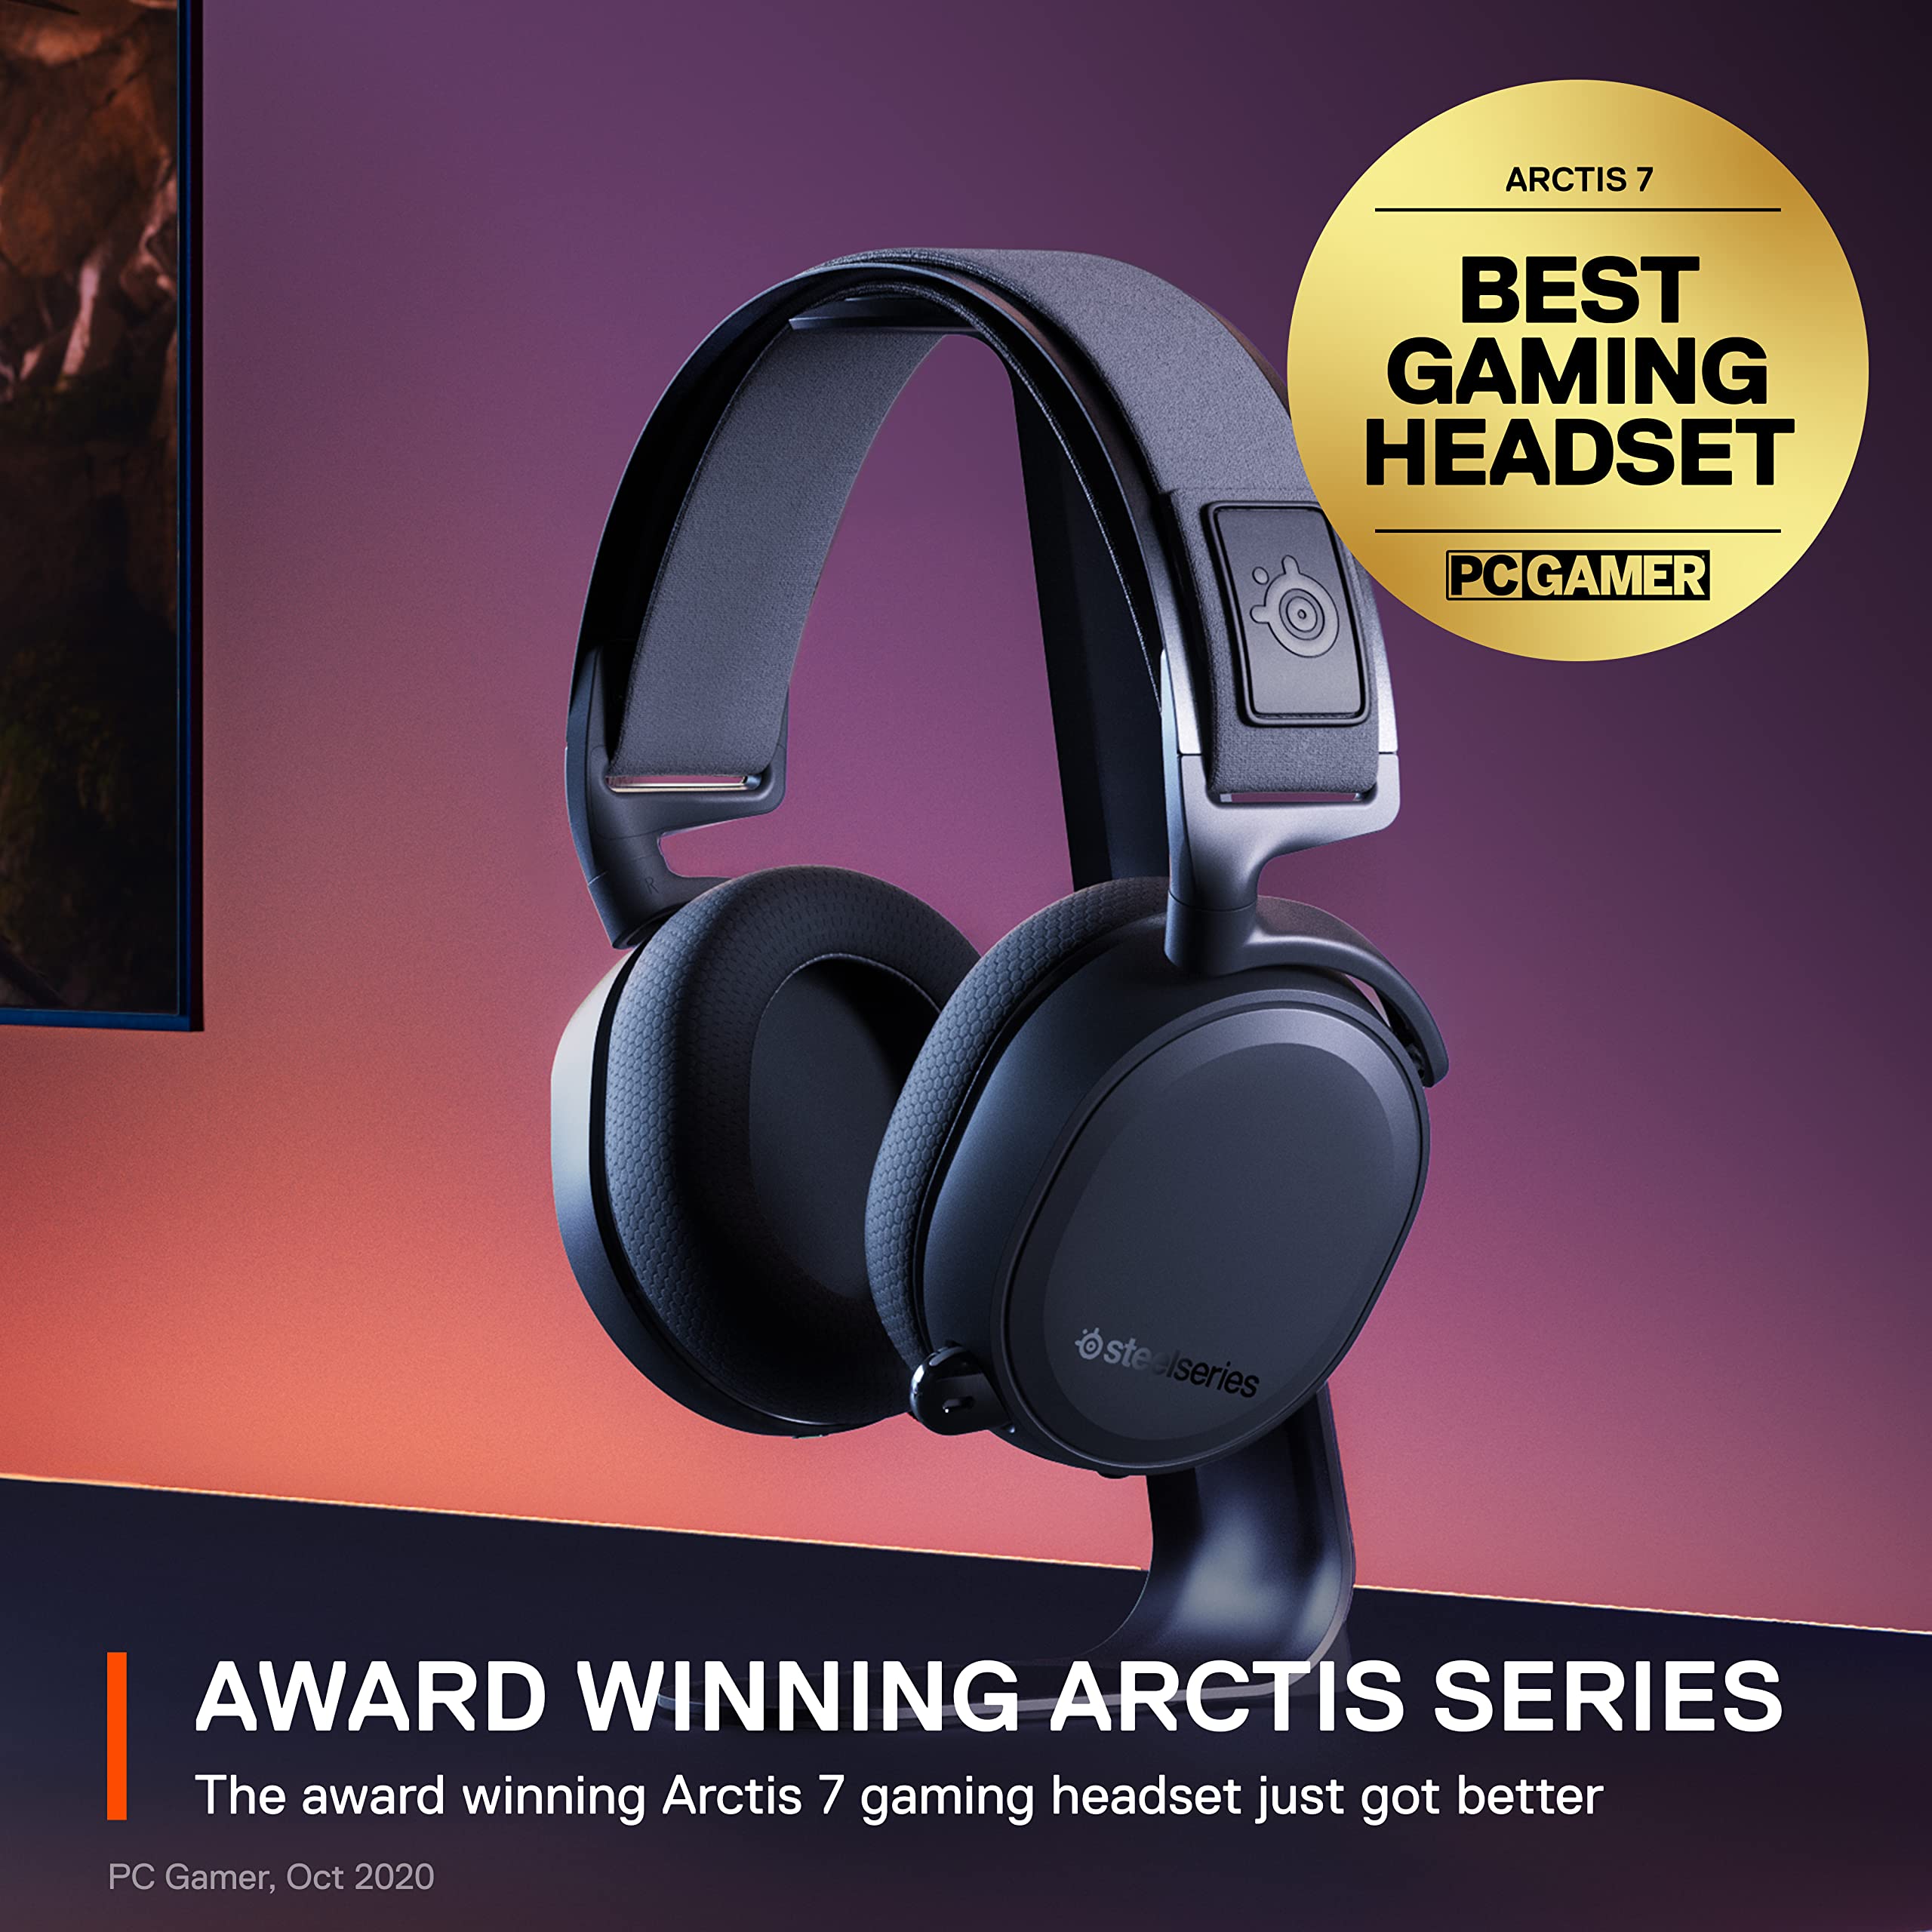 SteelSeries Arctis 7+ Wireless Gaming Headset – Lossless 2.4 GHz – 30 Hour Battery Life – USB-C – 7.1 Surround – For PC, PS5, PS4, Mac, Android and Switch - Black